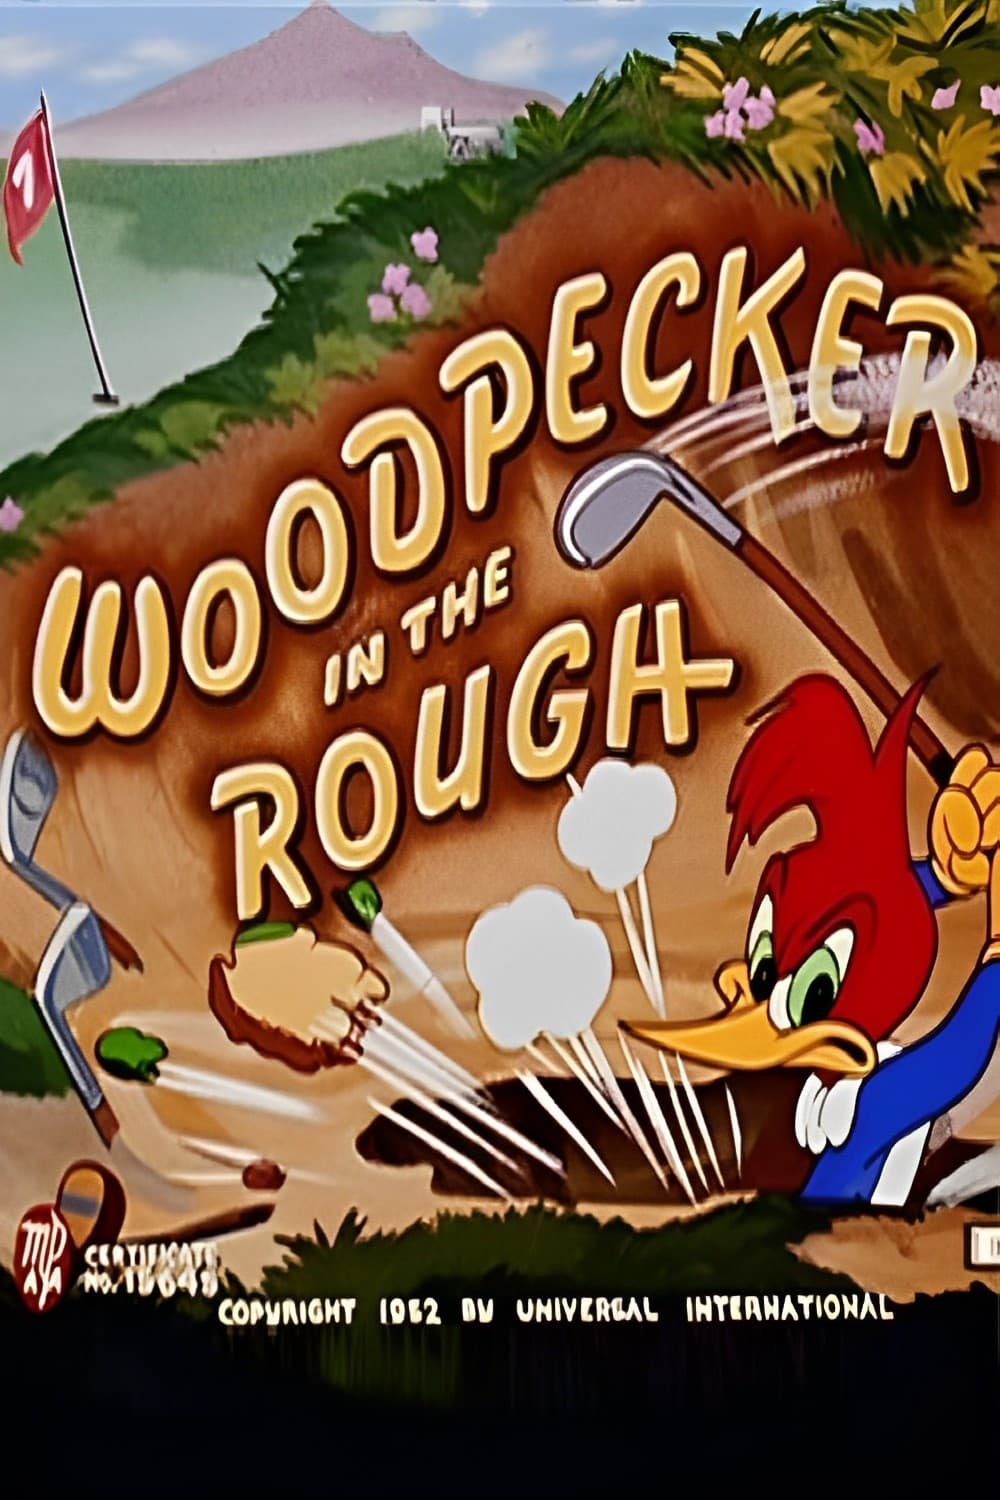 Woodpecker in the Rough (1952)